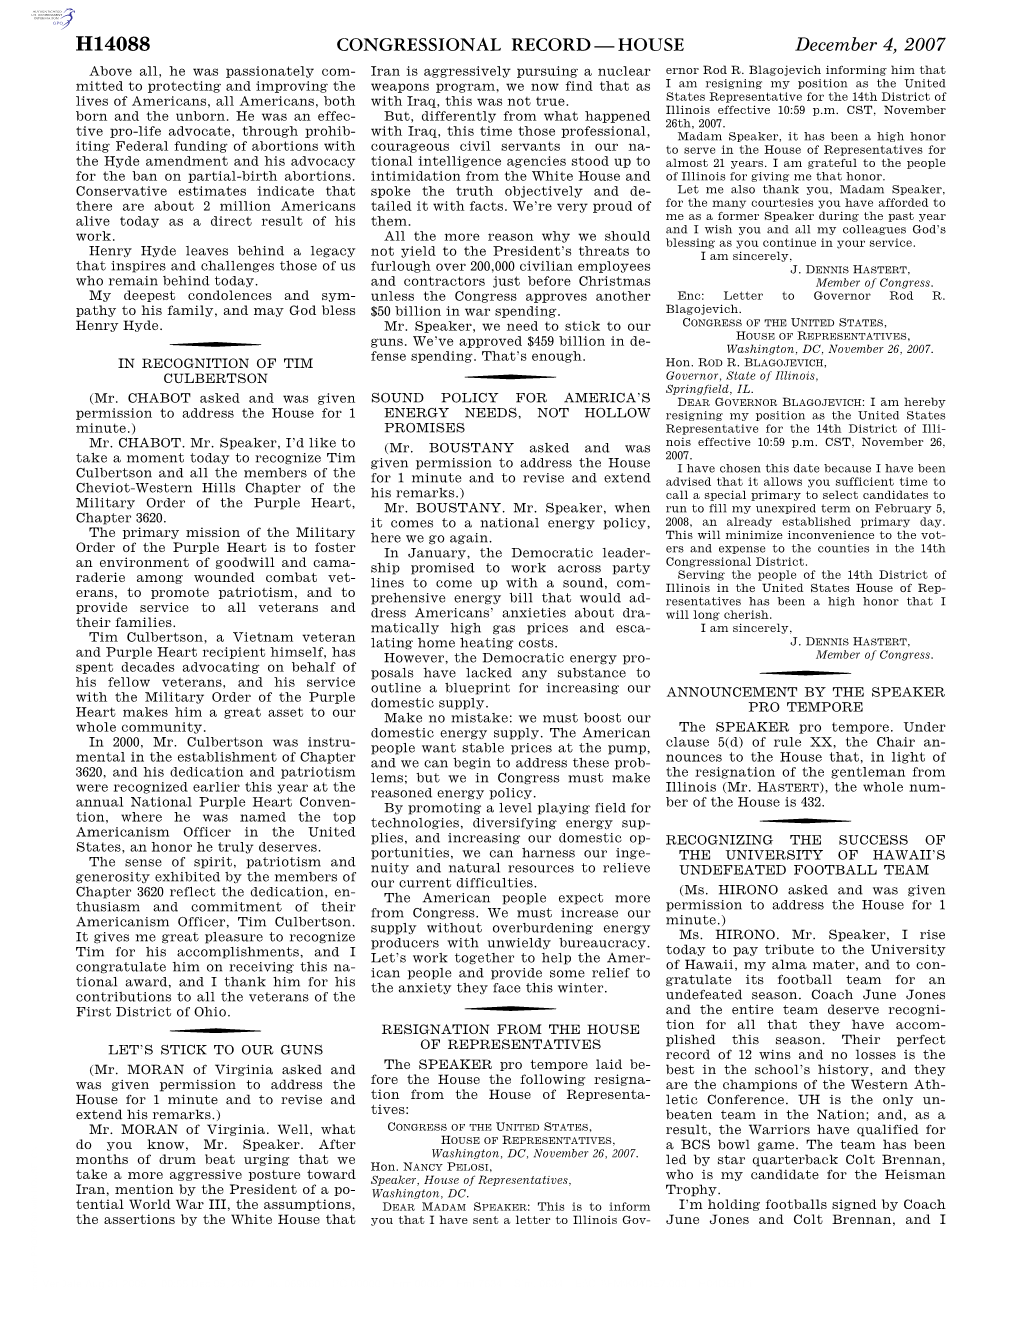 Congressional Record—House H14088